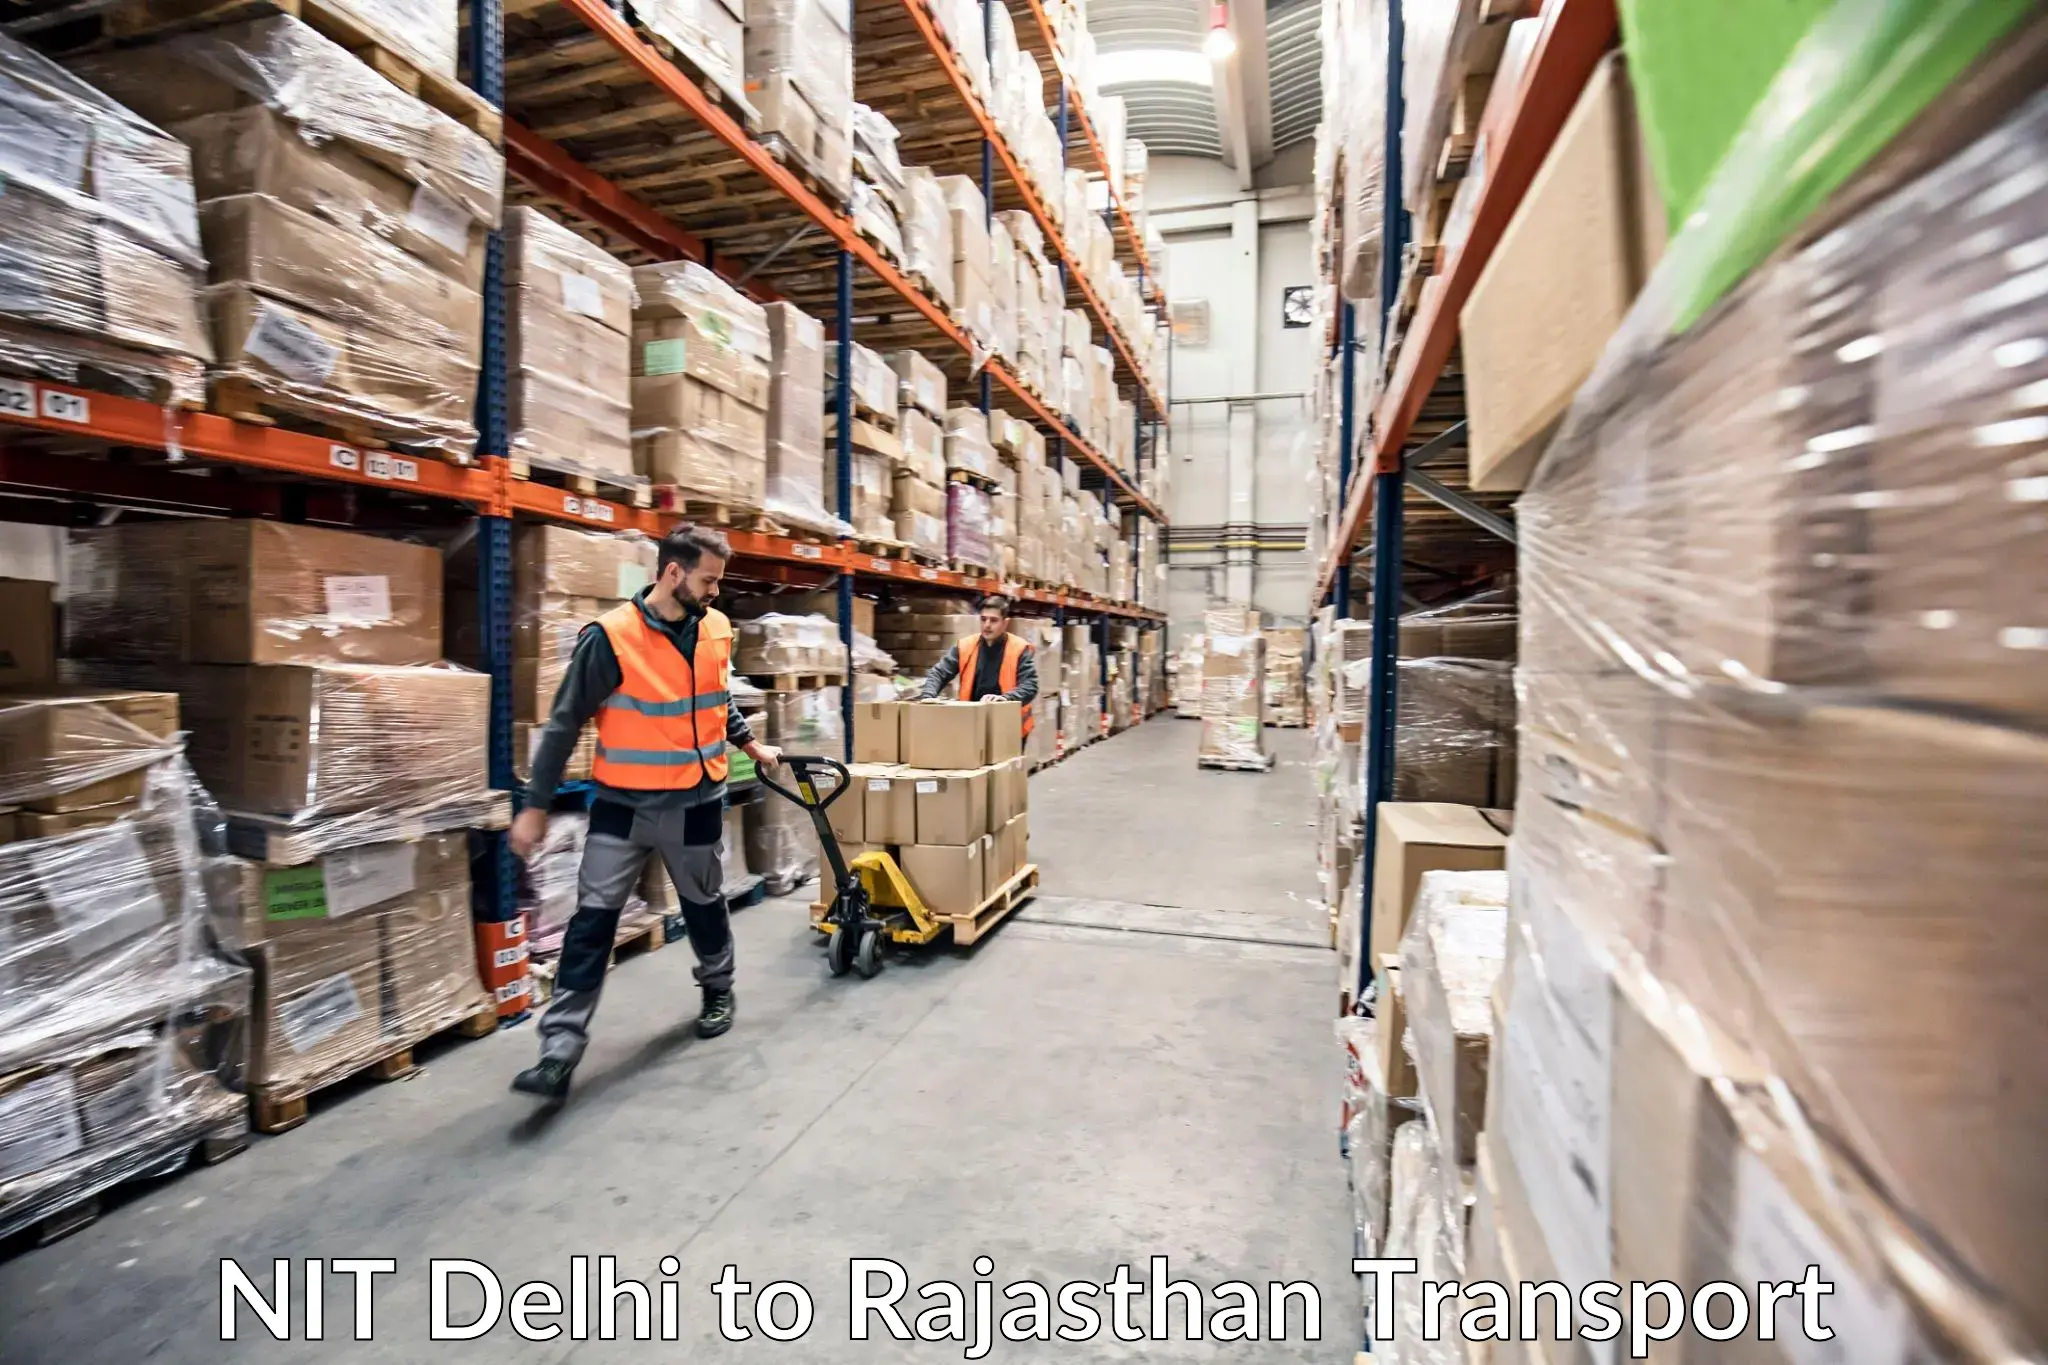 Truck transport companies in India in NIT Delhi to Rajasthan